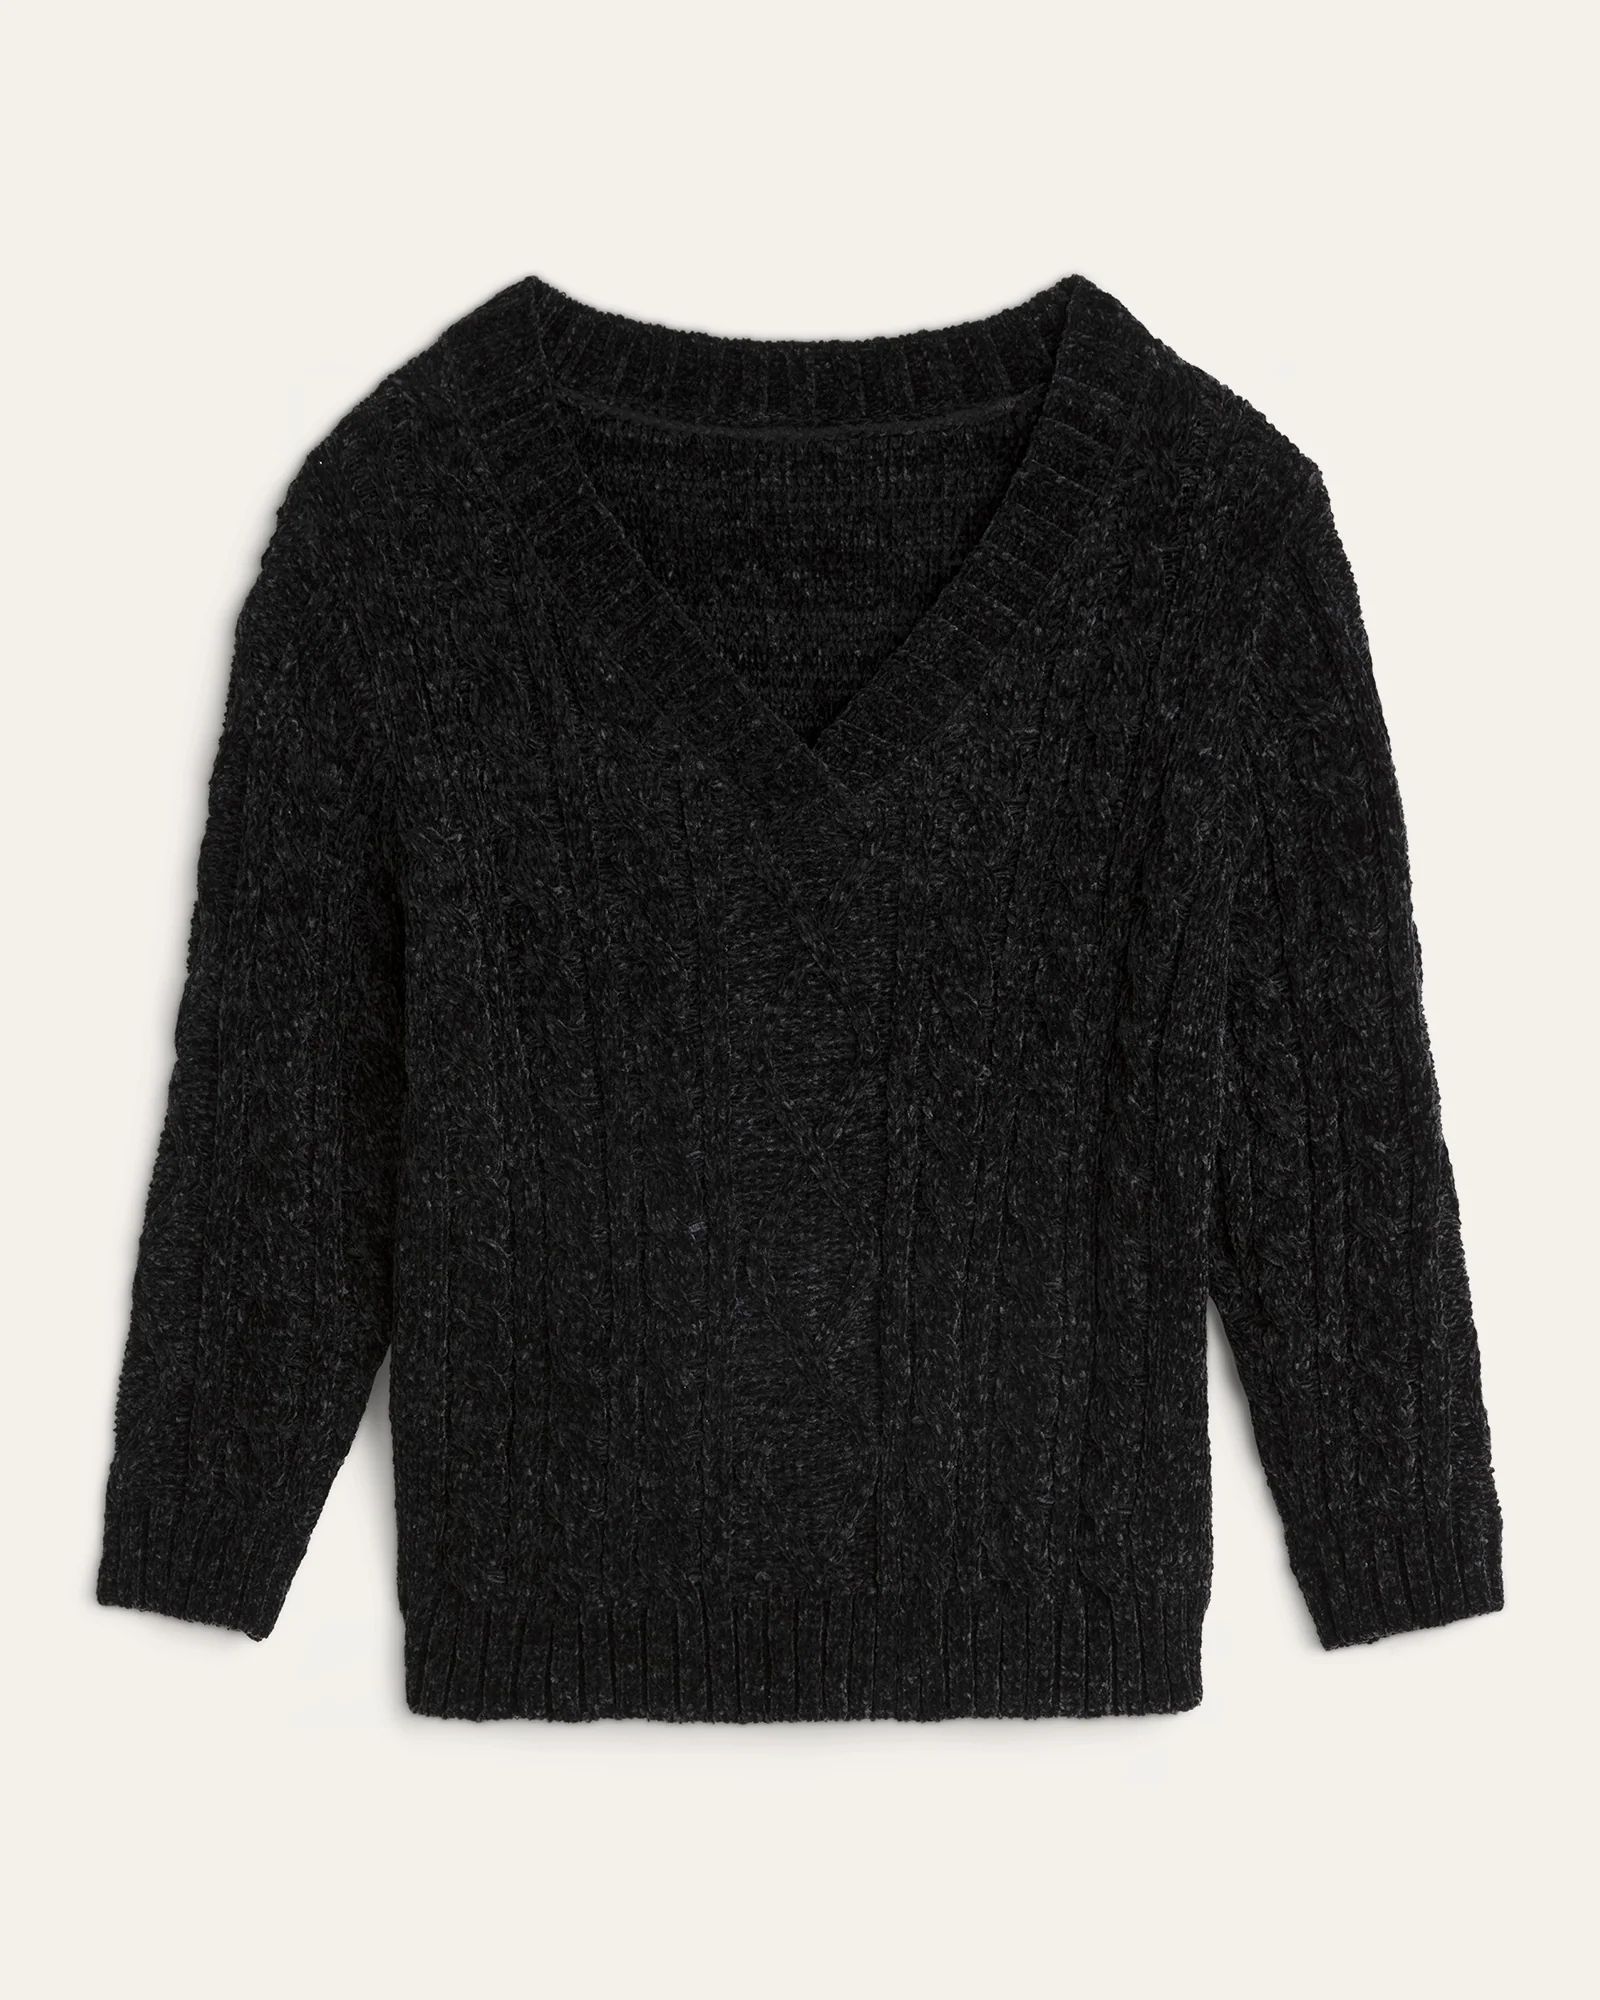 37Orchard Chantelle Cable Knit V-Neck Sweater | Black | Women's Tops | Dia & Co